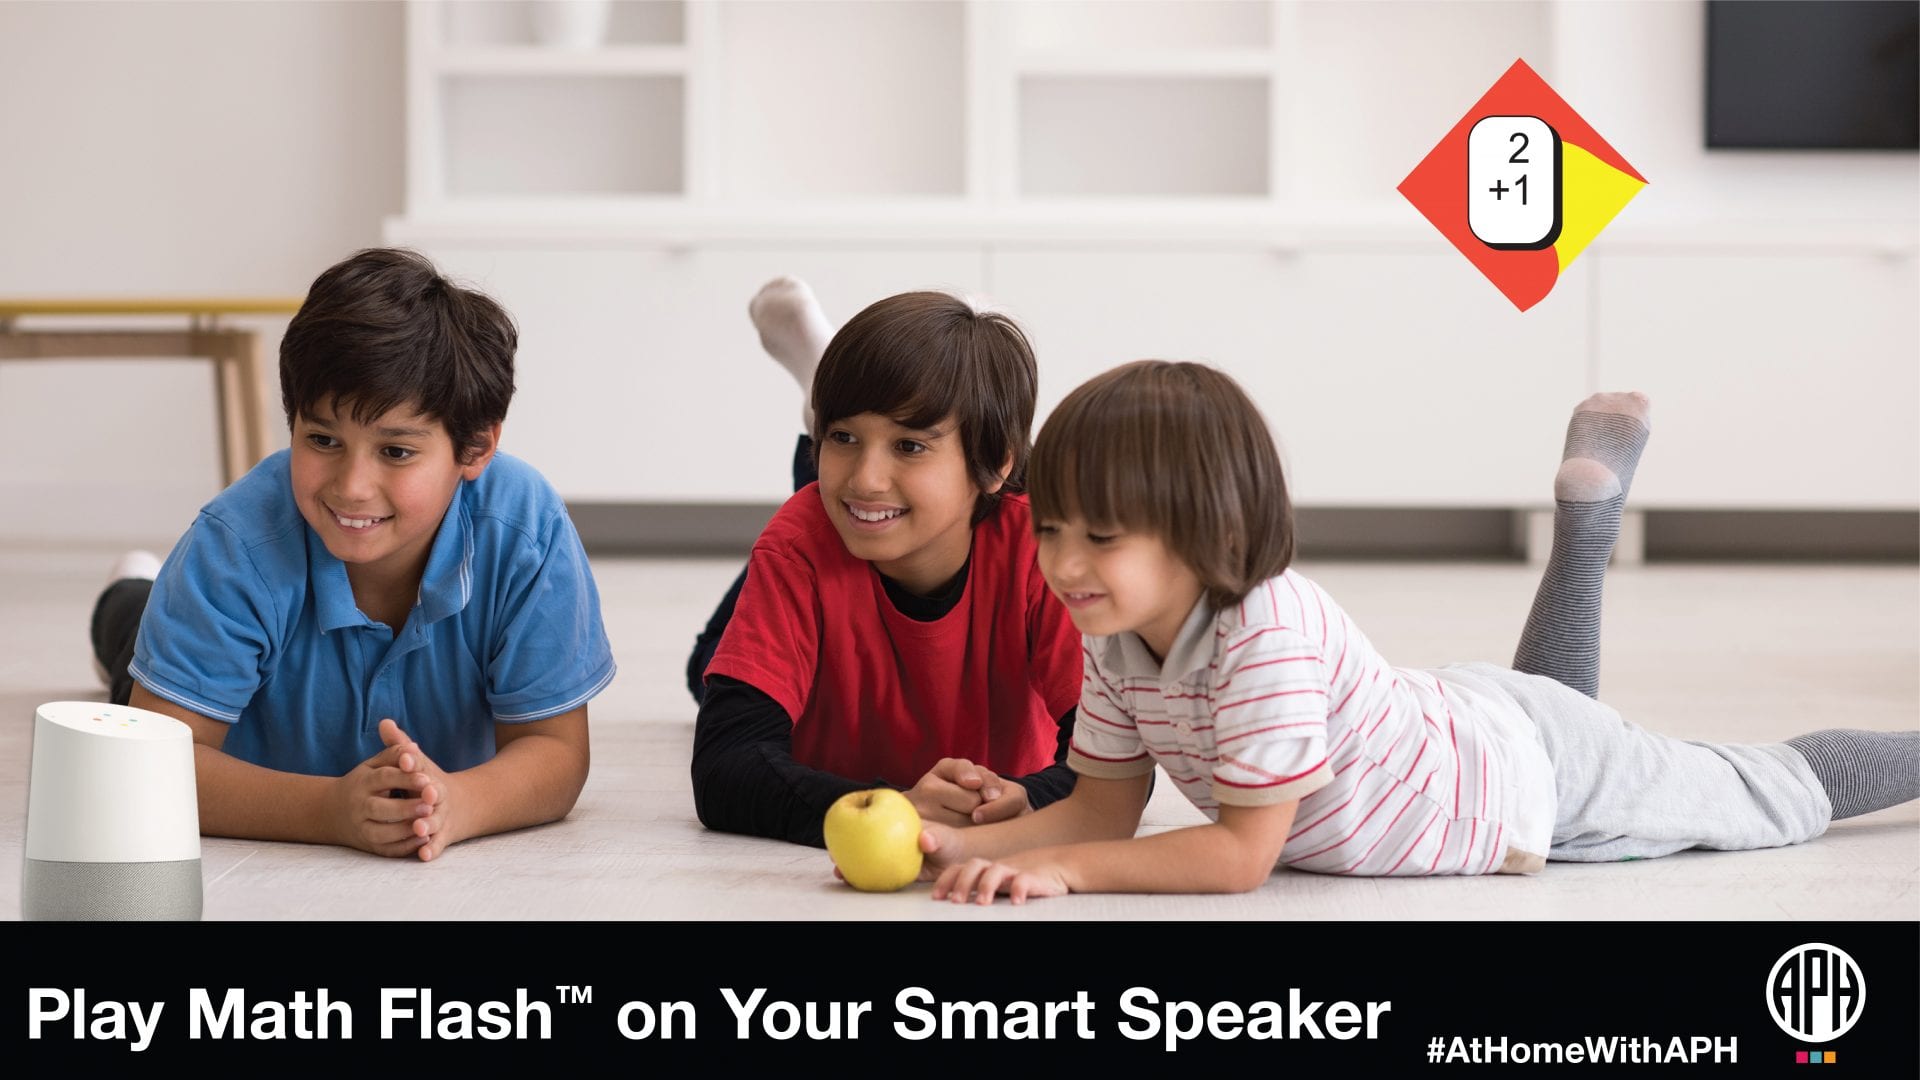 three children on the floor of a living room with a Google Home device. text reads "Math Flash on Your Smart Speaker #AtHomeWithAPH"